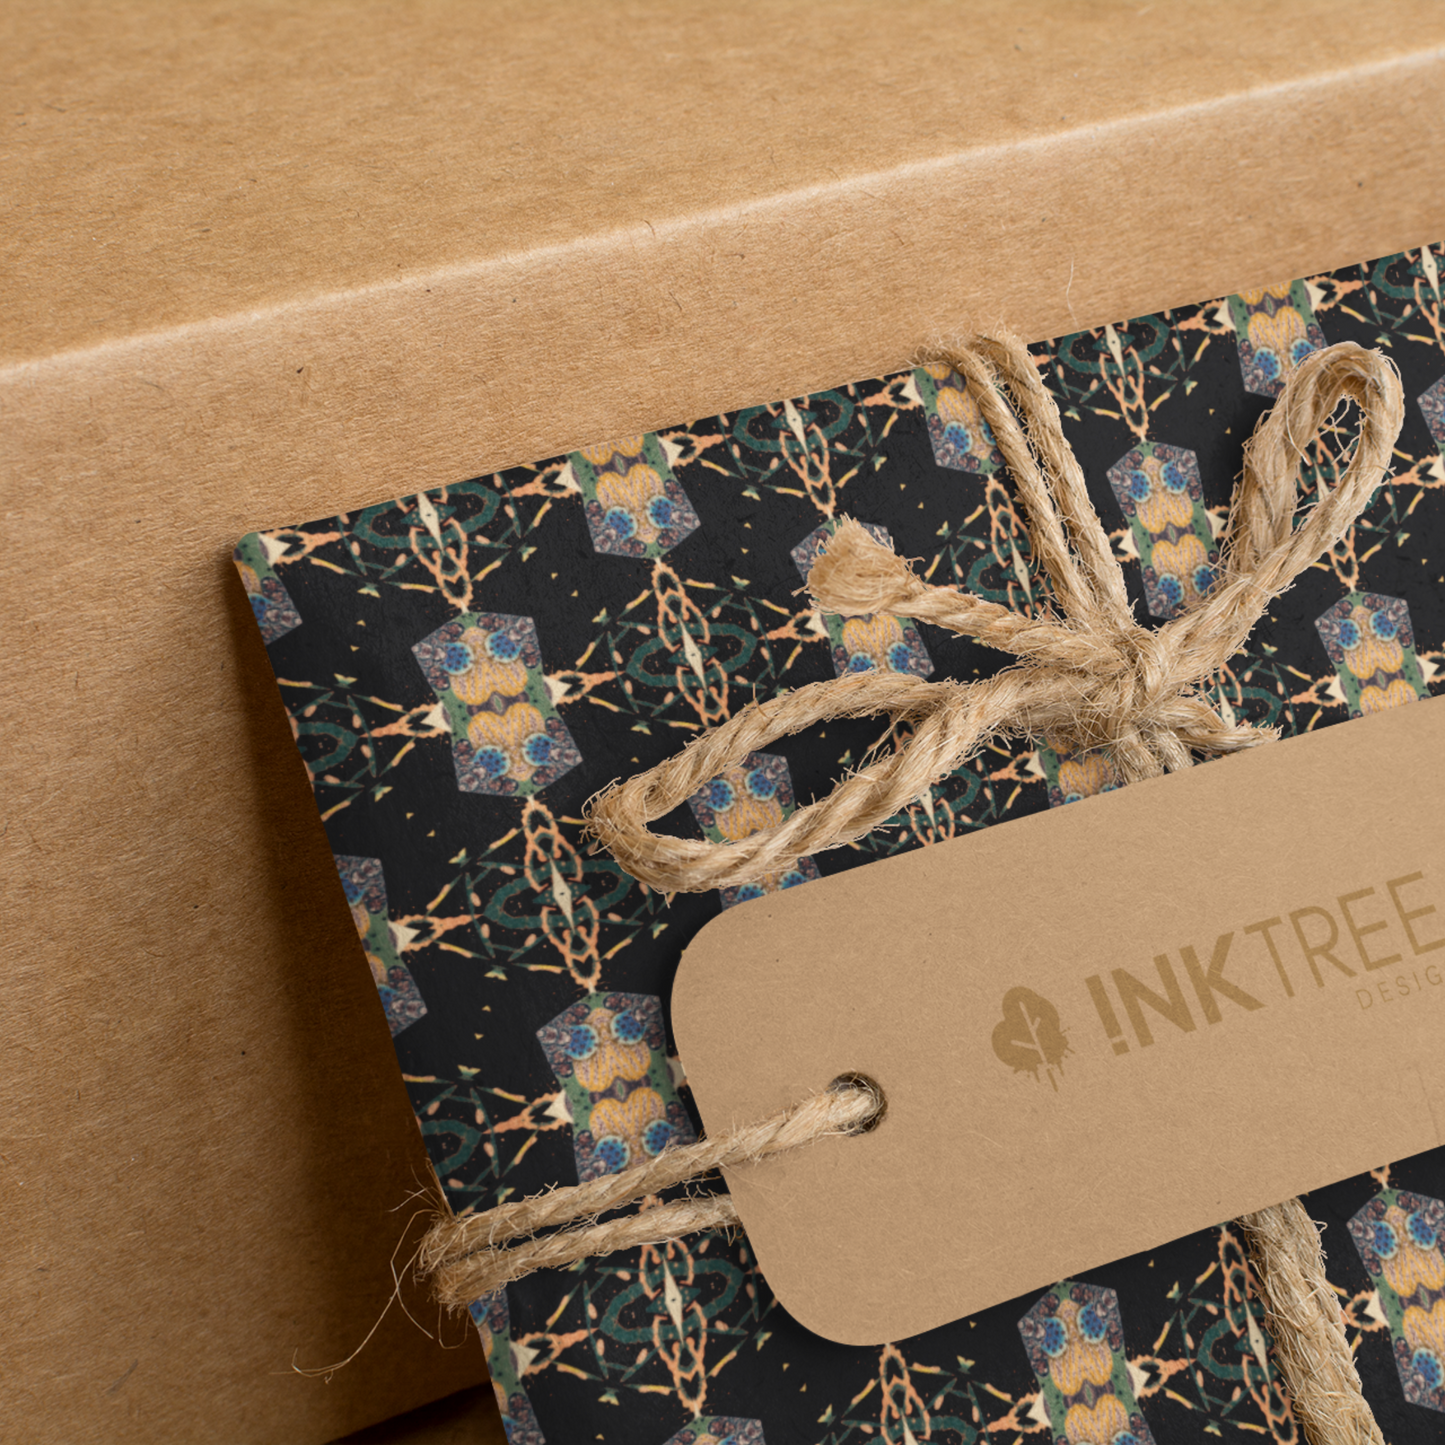 A present wrapped with a gold, black, blue, green and white oriental looking pattern, tied with brown string with a brown paper tag with ink tree design logo on it, leaning on a brown paper background.